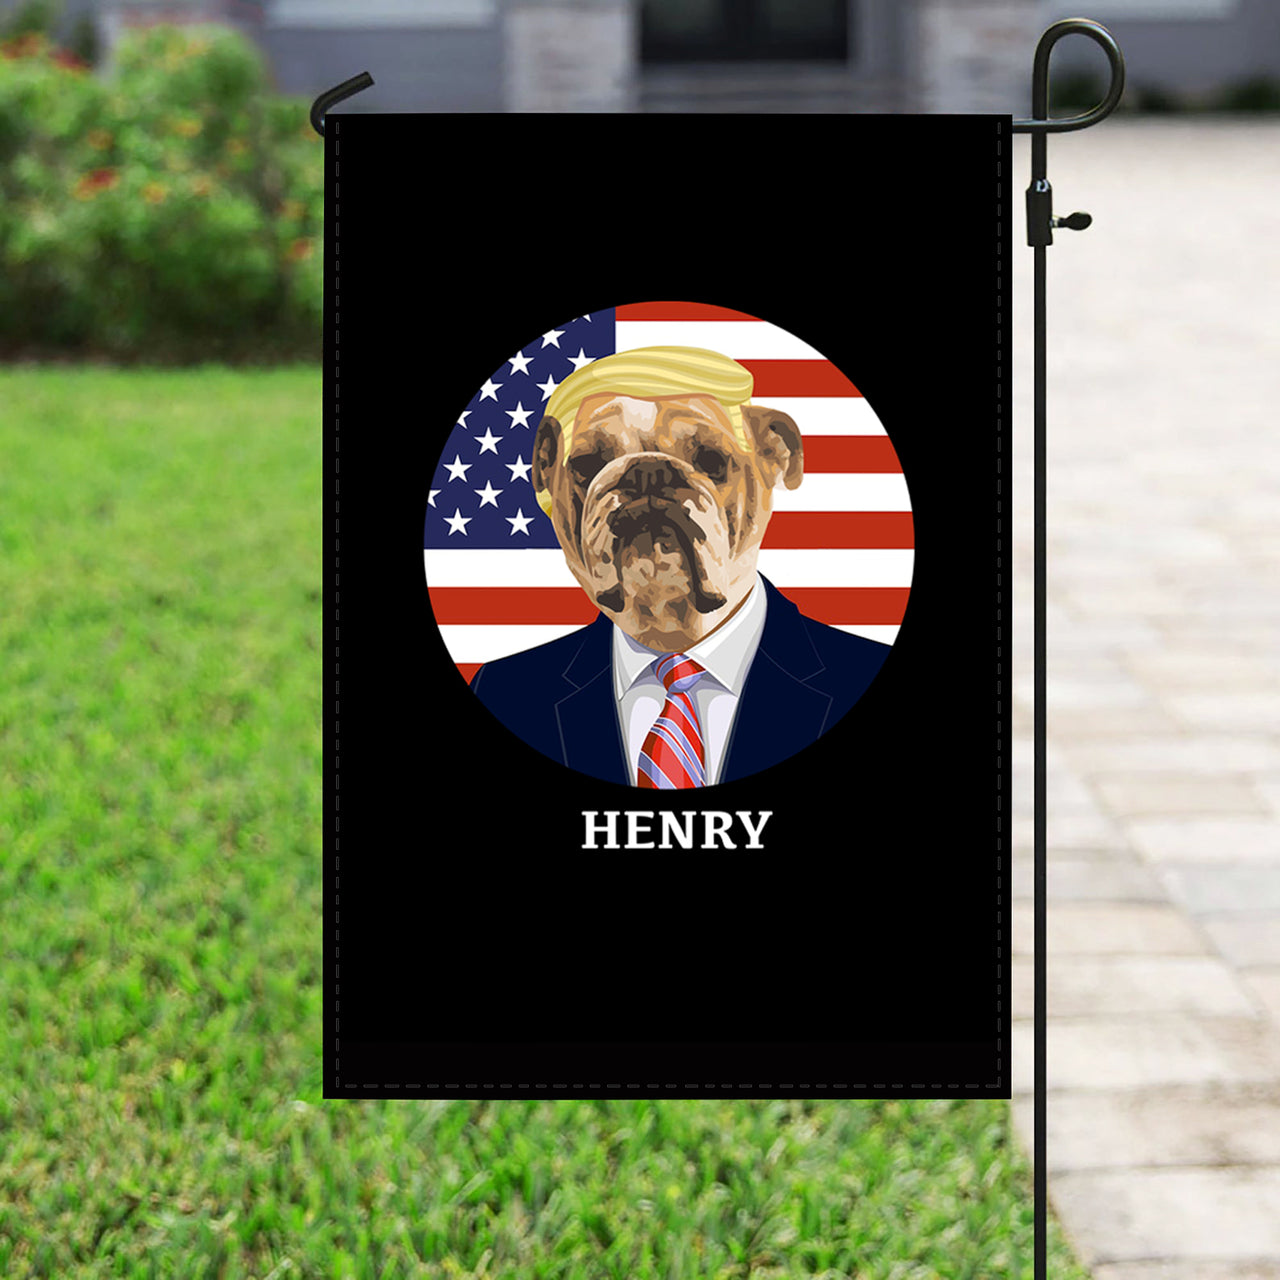 Personalized Dog Flag Gift Idea - President Dog With Blonde Hair For Dog Lovers - Garden Flag